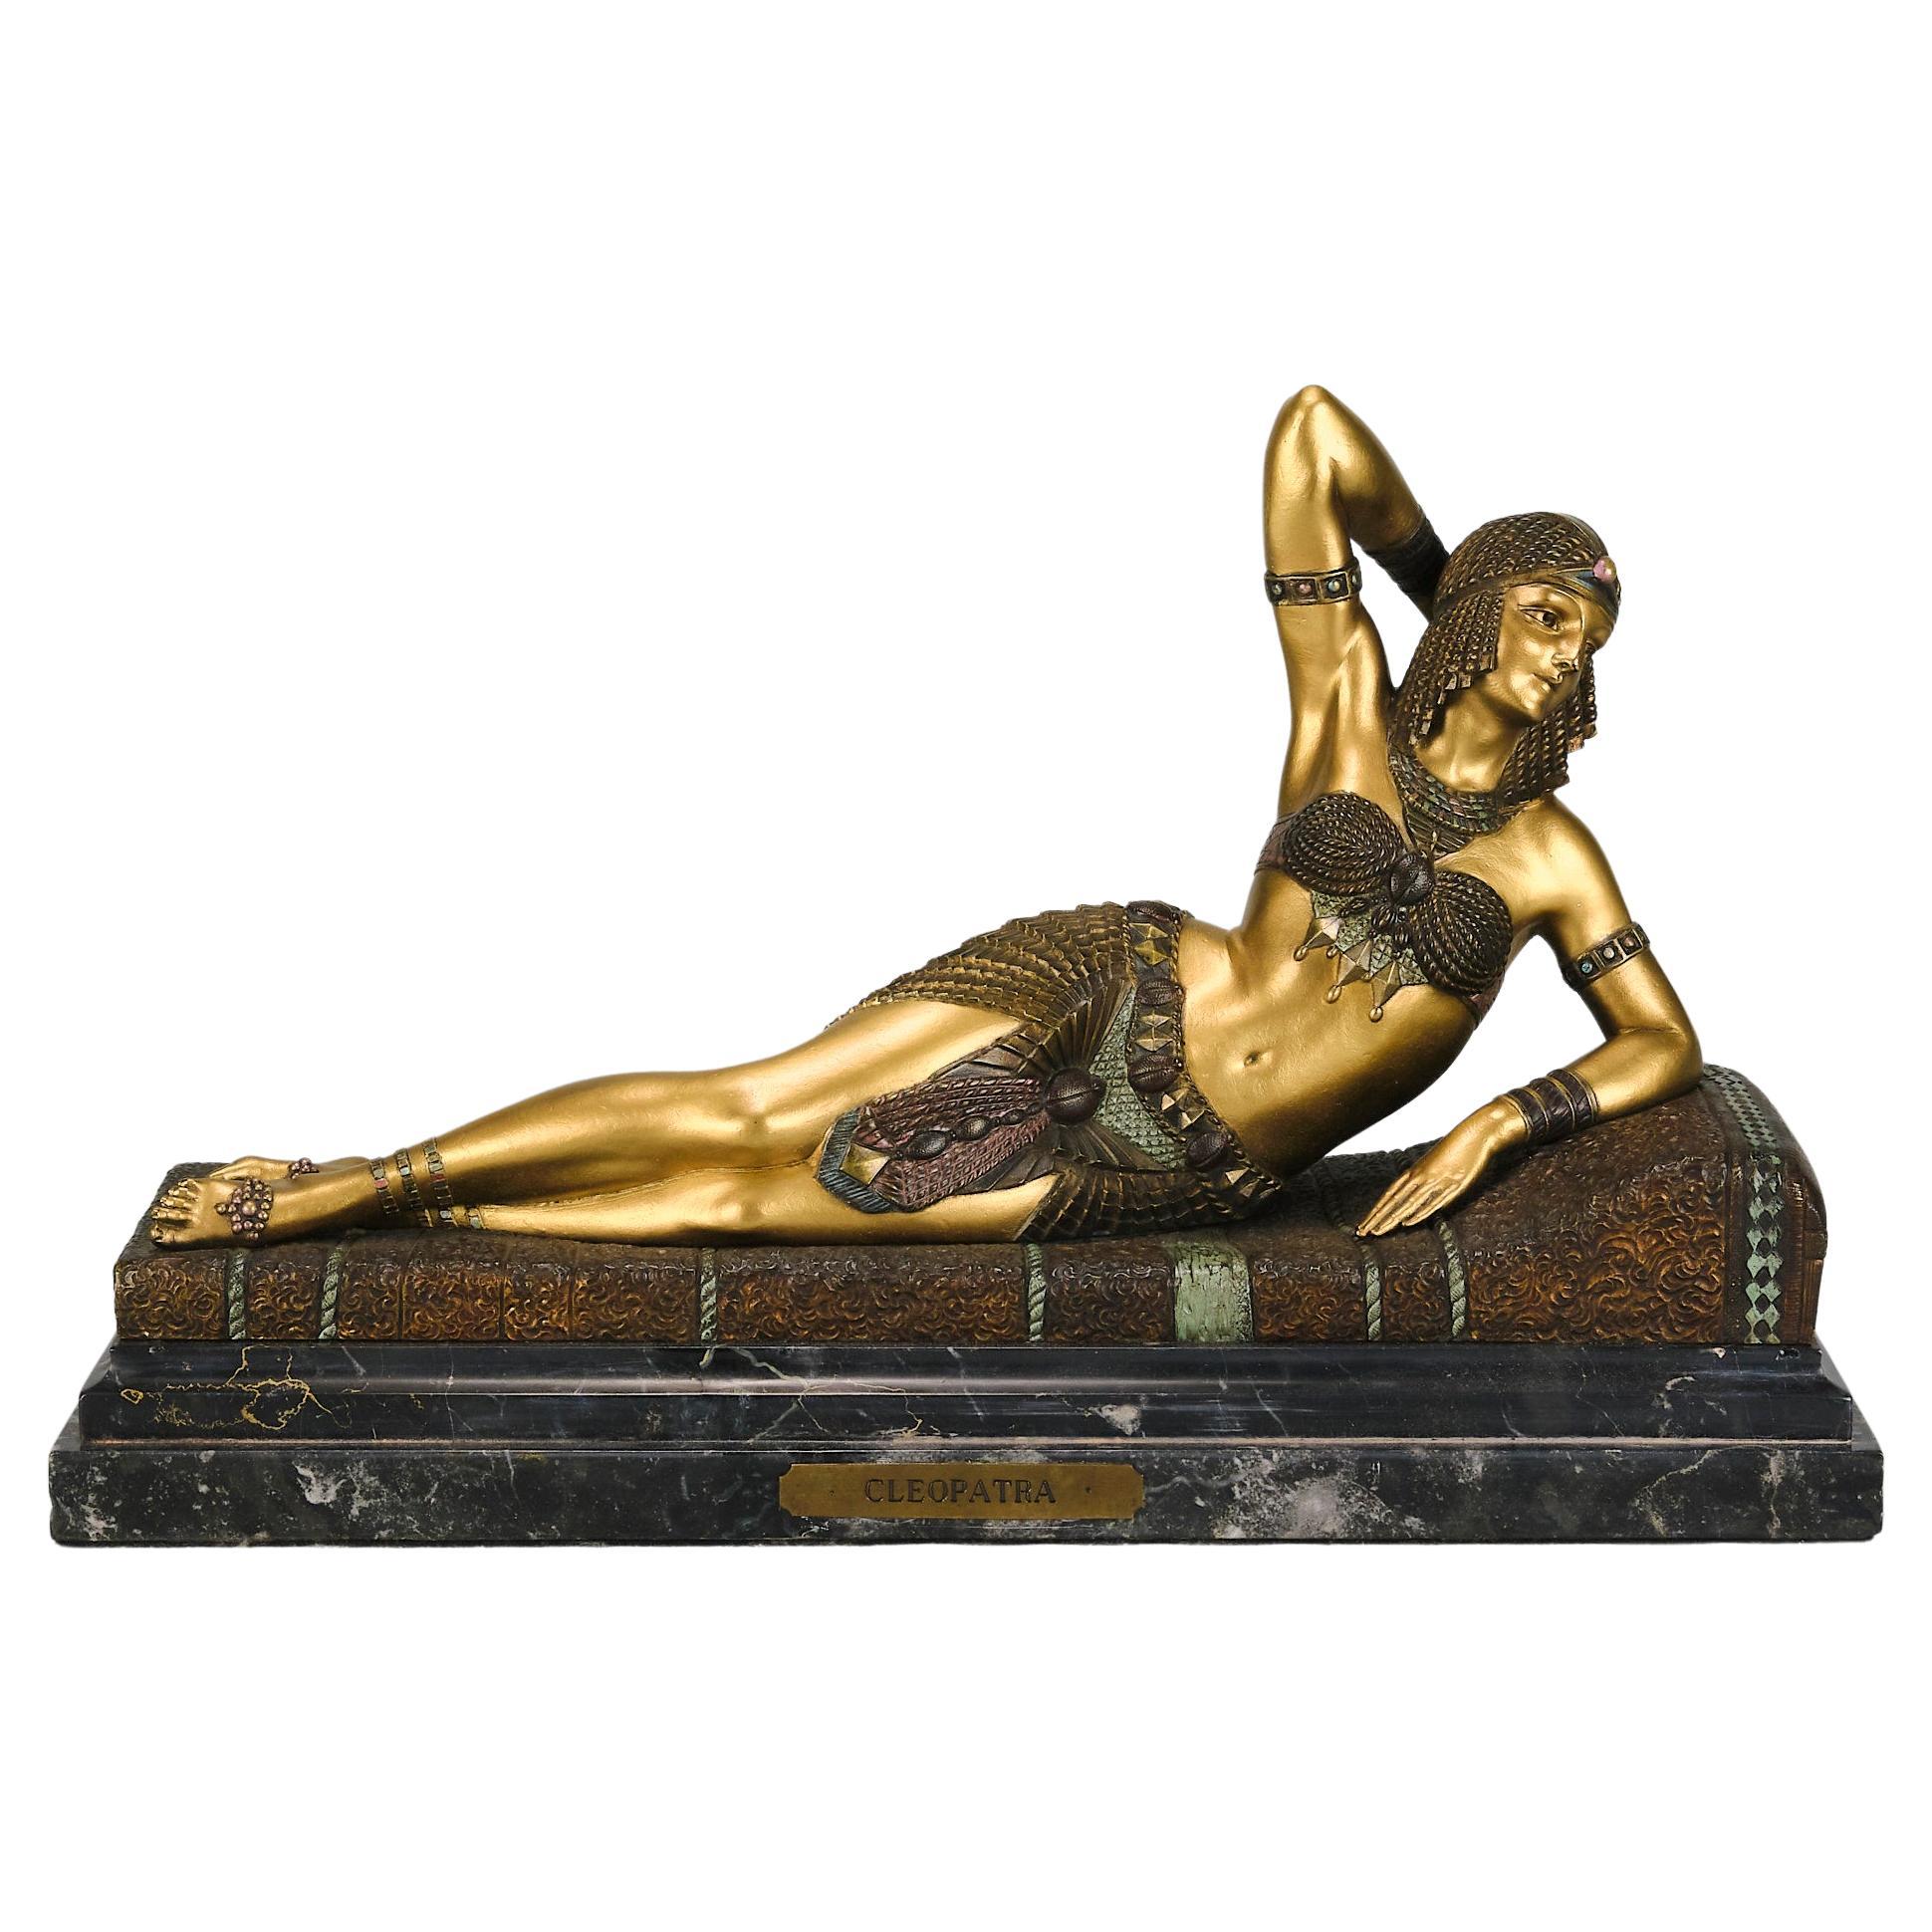 Early 20th Century Bronze Entitled "Cleopatra" by Demetre Chiparus